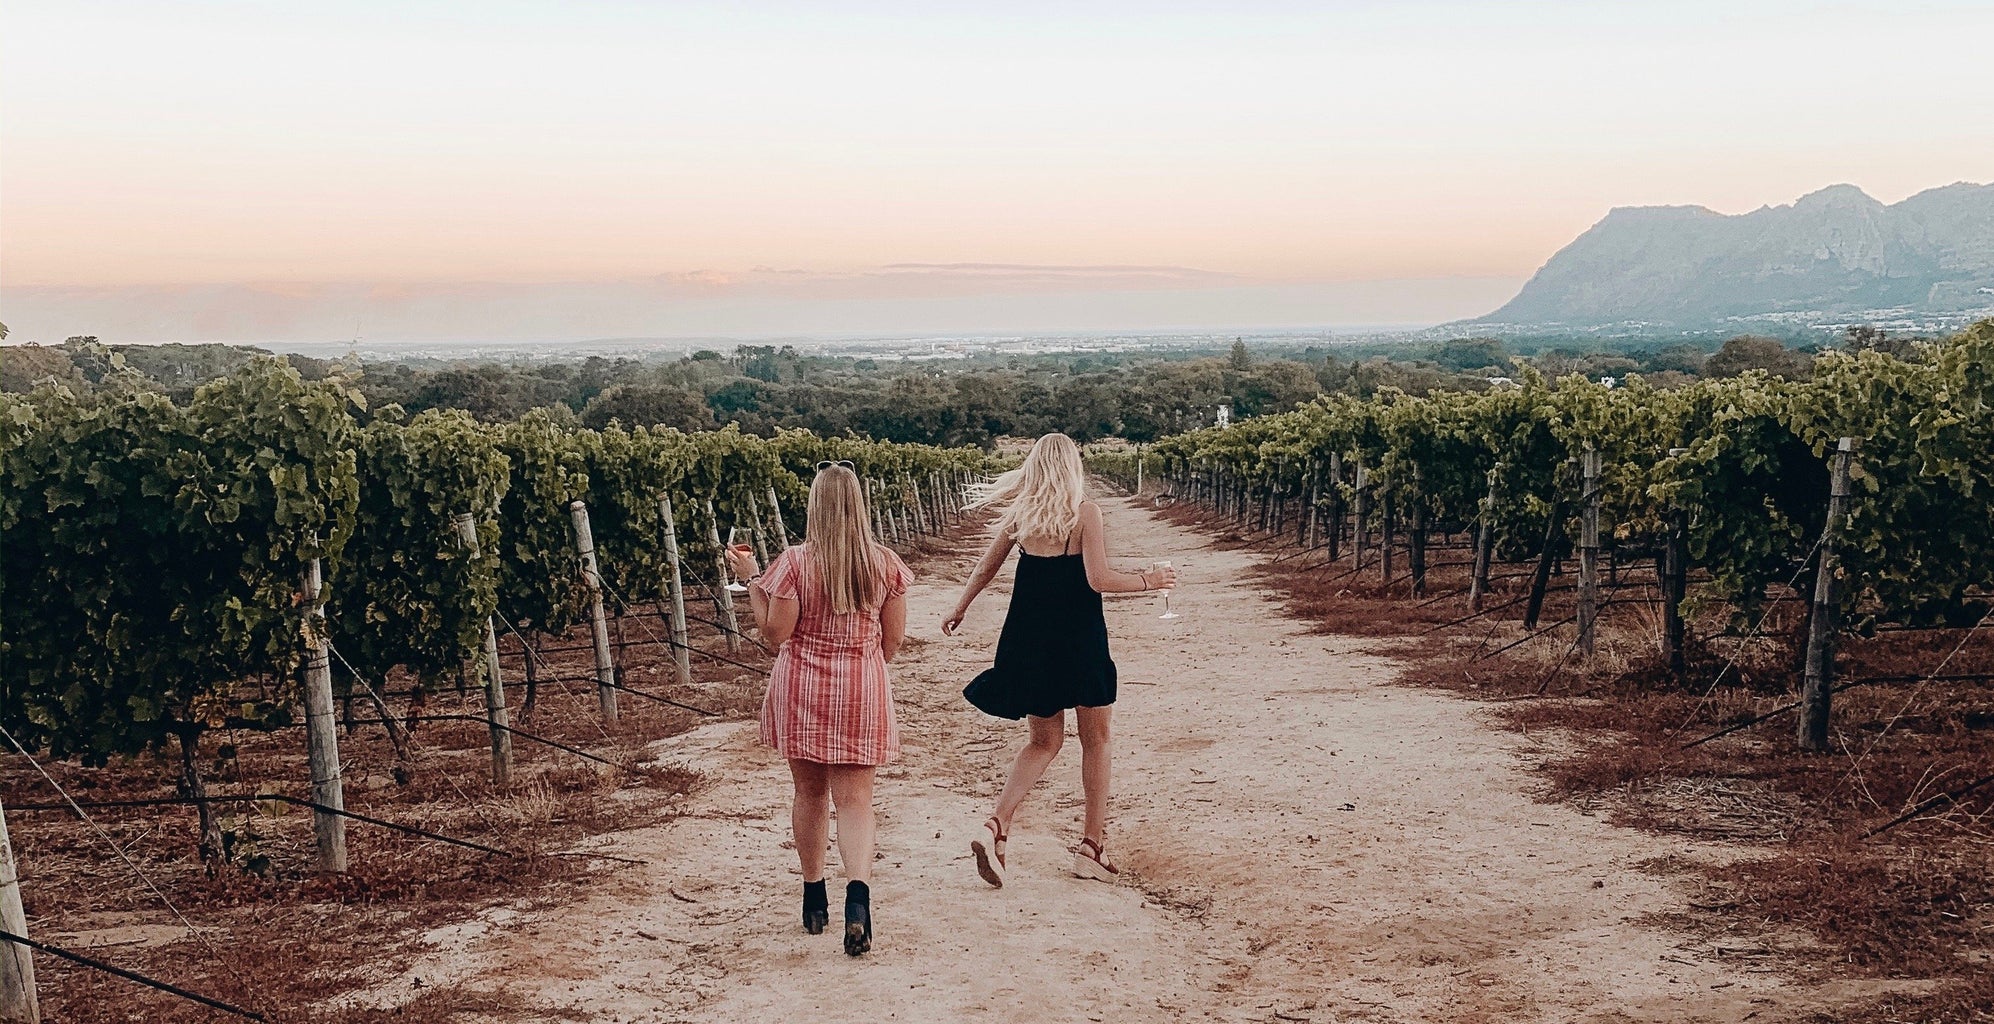 dancing through a wine vineyard in south africa